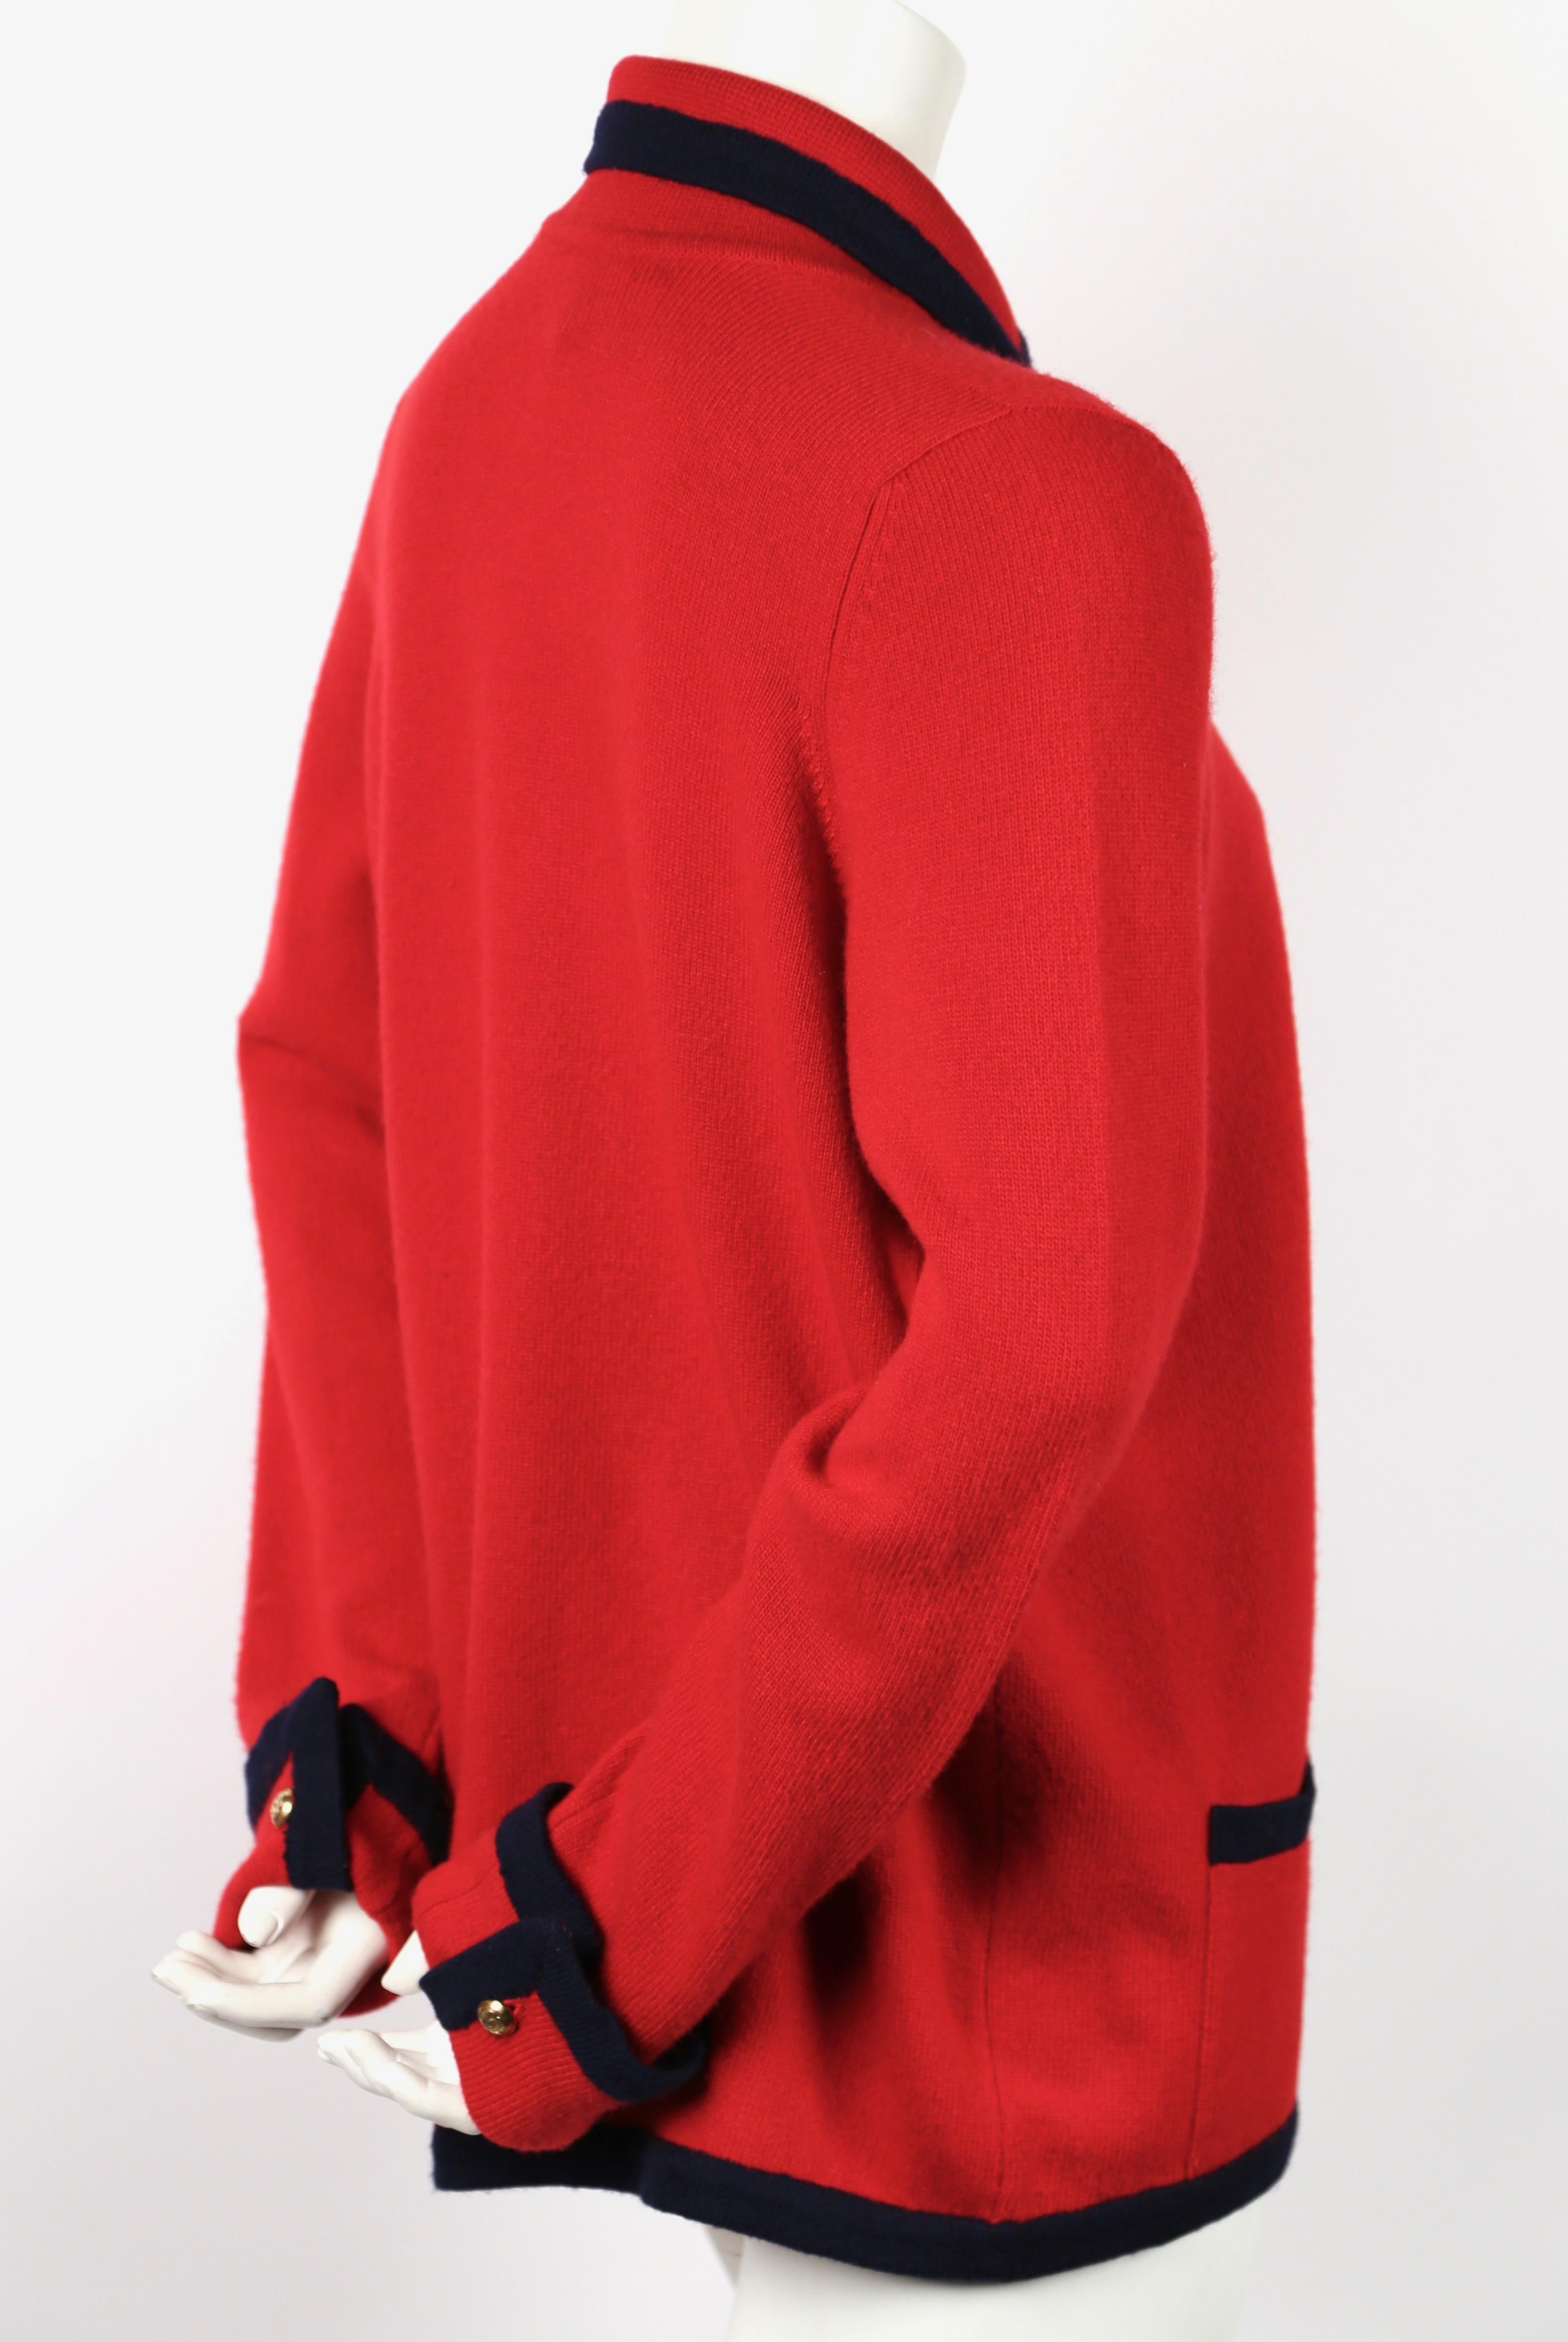 Classic red and navy blue cashmere cardigan with gilt CC buttons at neckline and sleeve cuffs from Chanel dating to the 1980's. Fits many sizes due to the open construction (Pictured on a size 2 mannequin). Sweater measures approximately,: 14